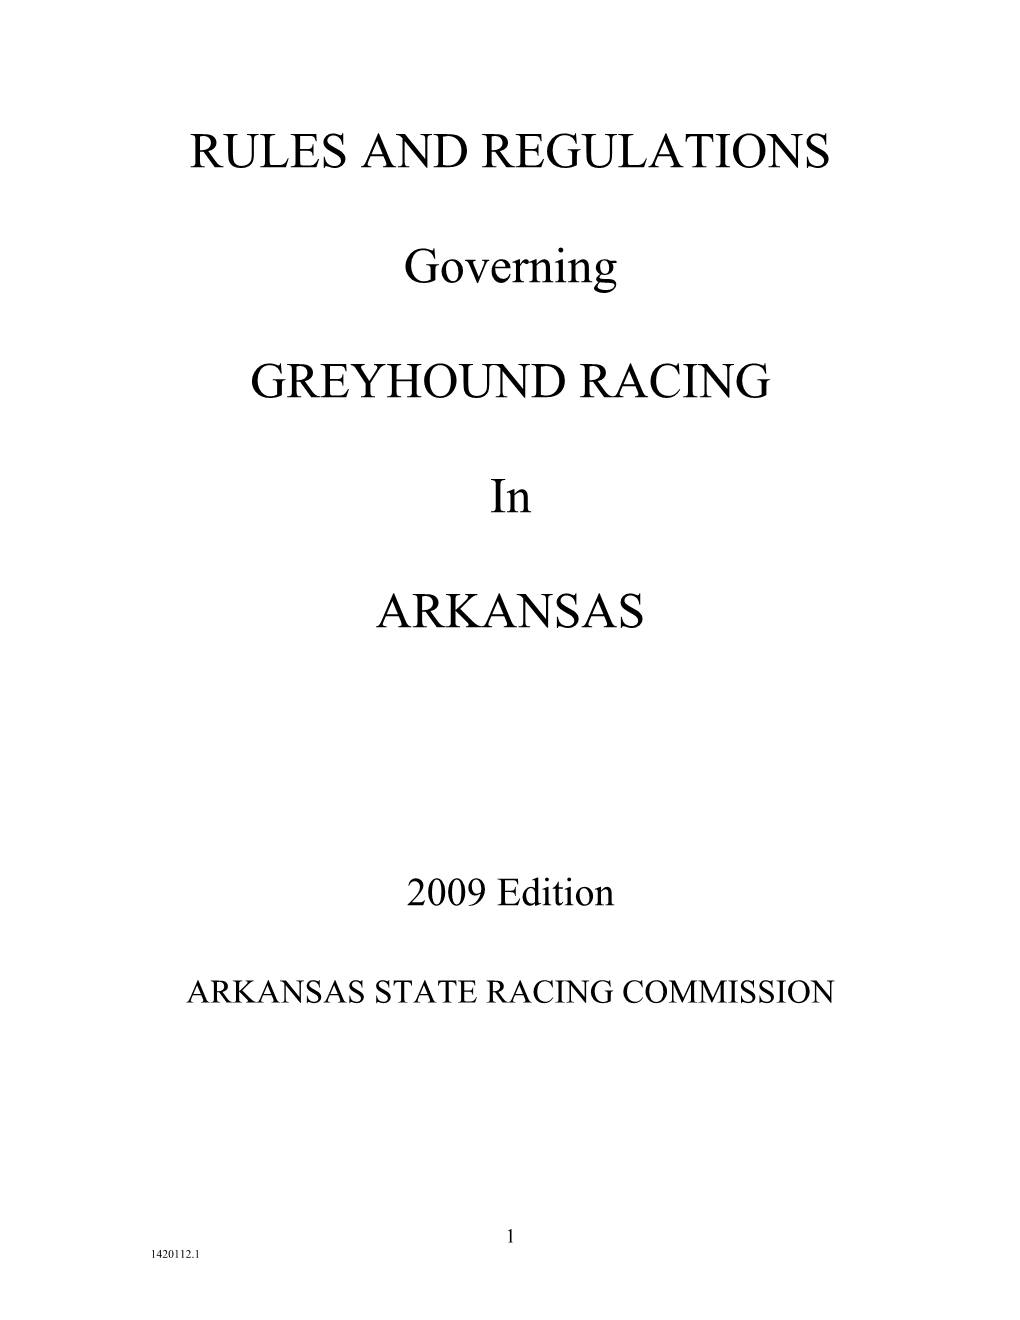 Rules and Regulations Governing Greyhound Racing in Arkansas Supersedes All Previous Rules and Regulations